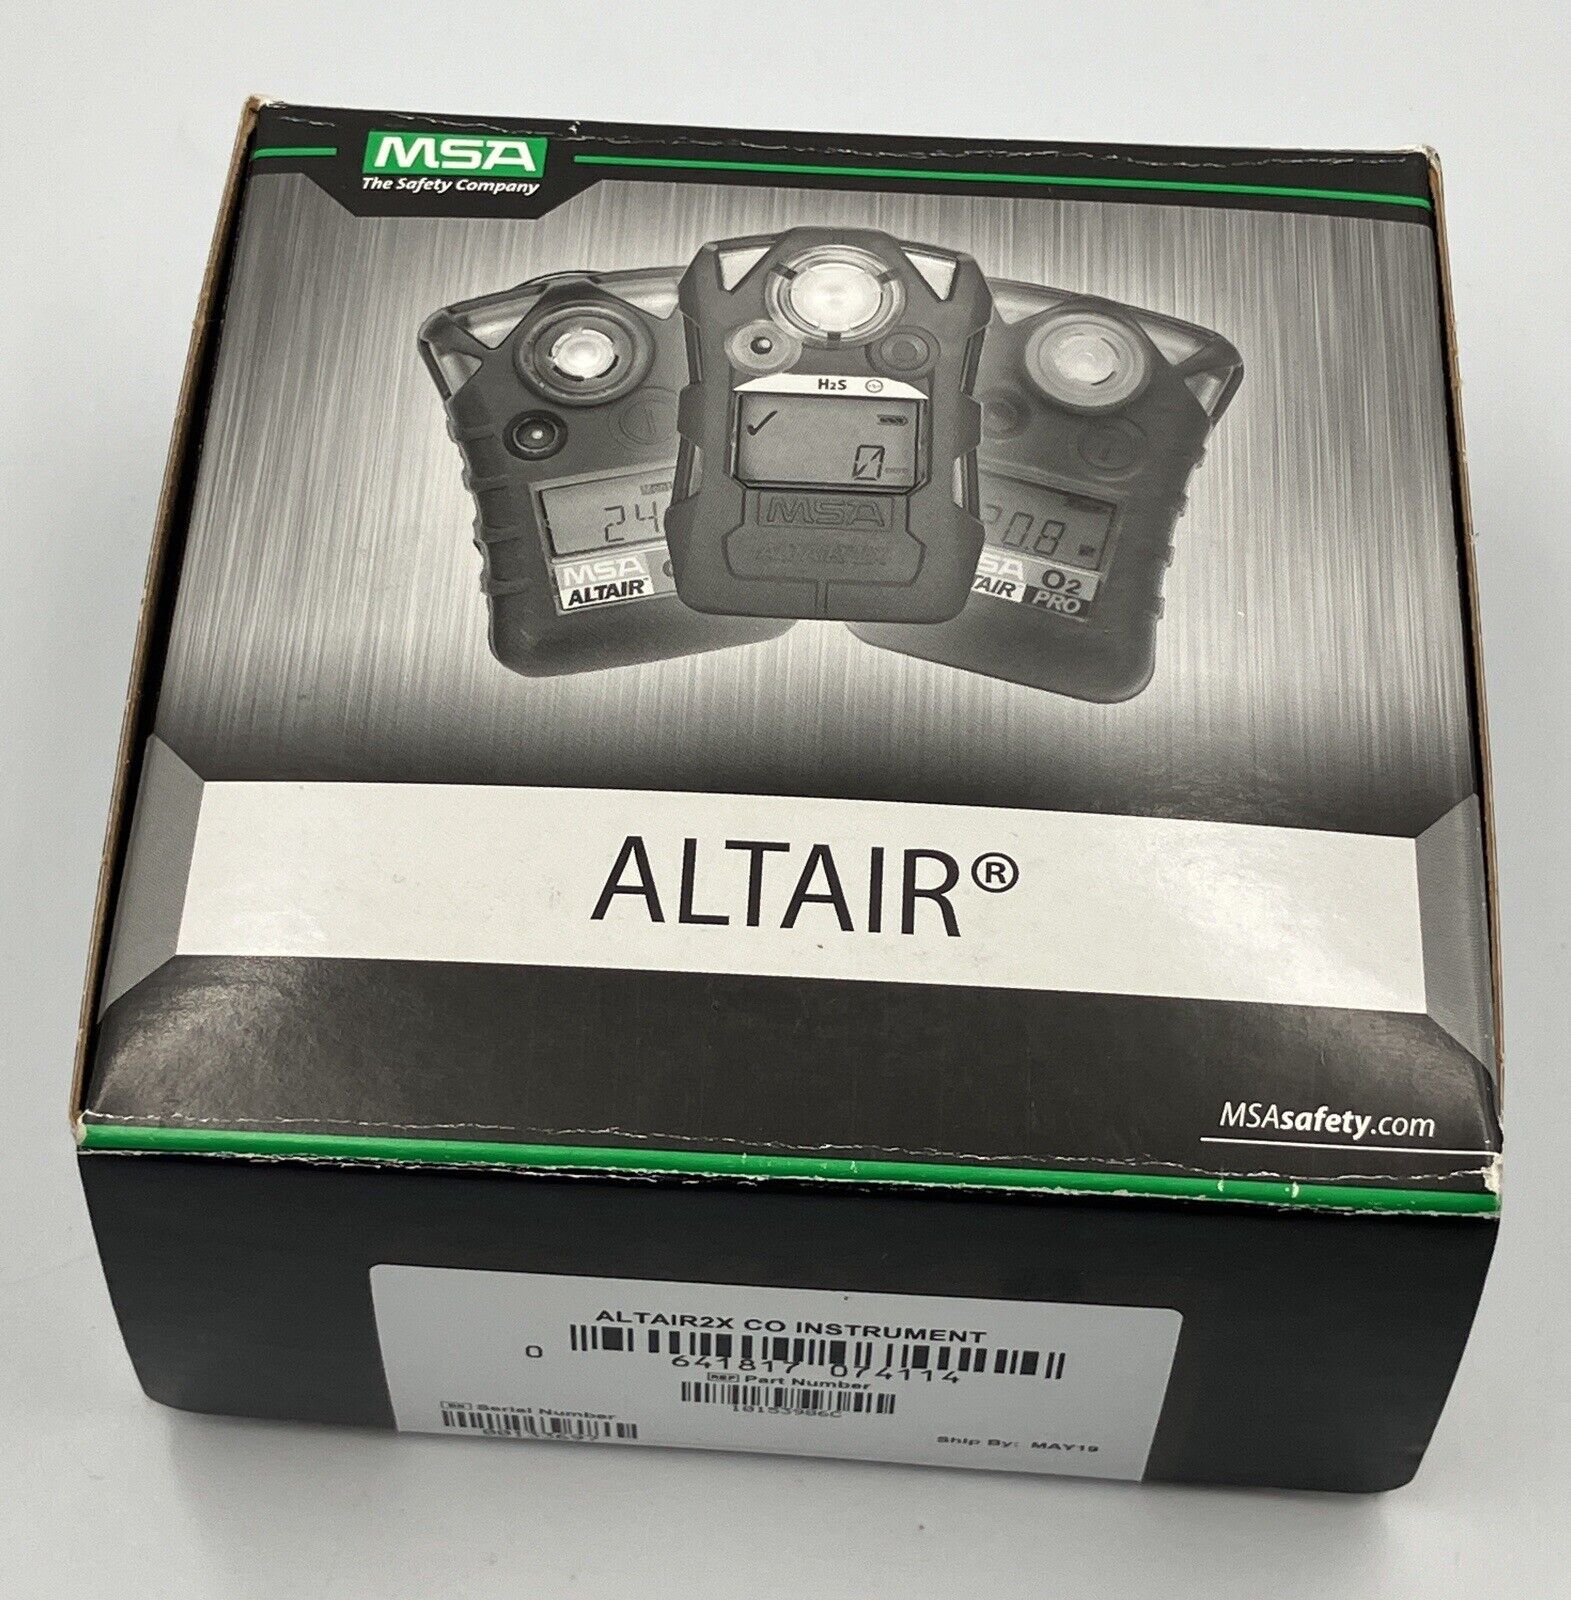 MSA Altair 2X Single Gas CO Detector (Part Number 10074137c) - Open Box